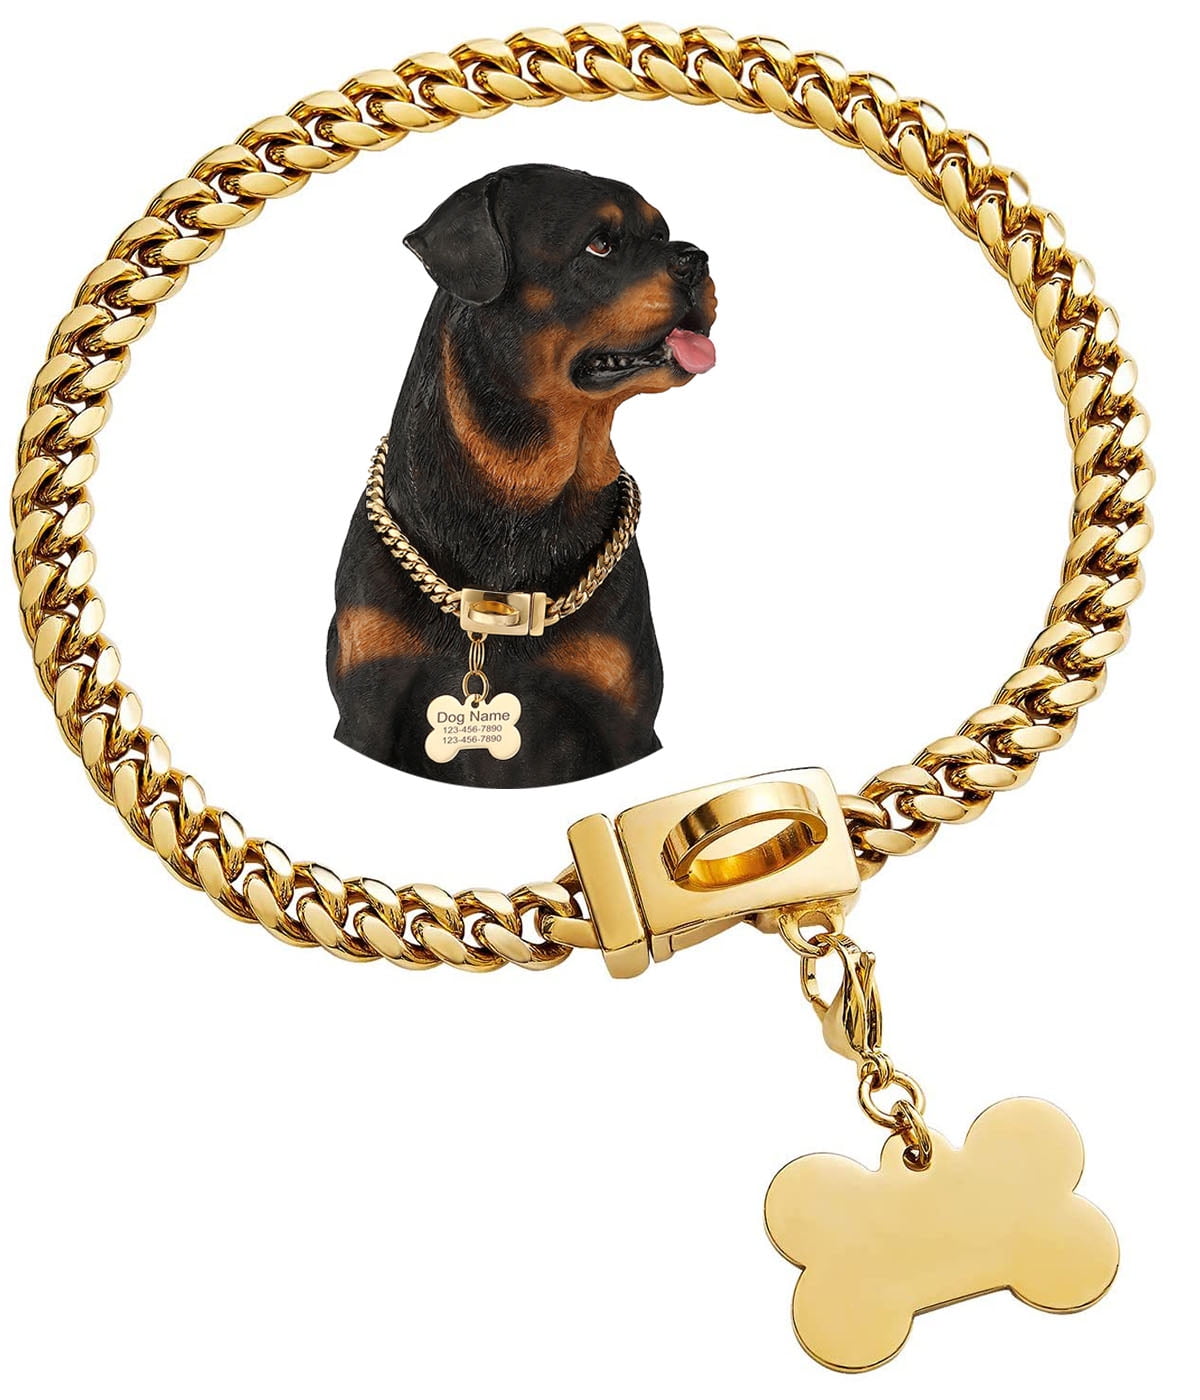 The Hermes | Gold Cuban Link Dog Chain | Small Dog Cuban Link Collar Online | Bully Chainz 14 / Cuban / Gold